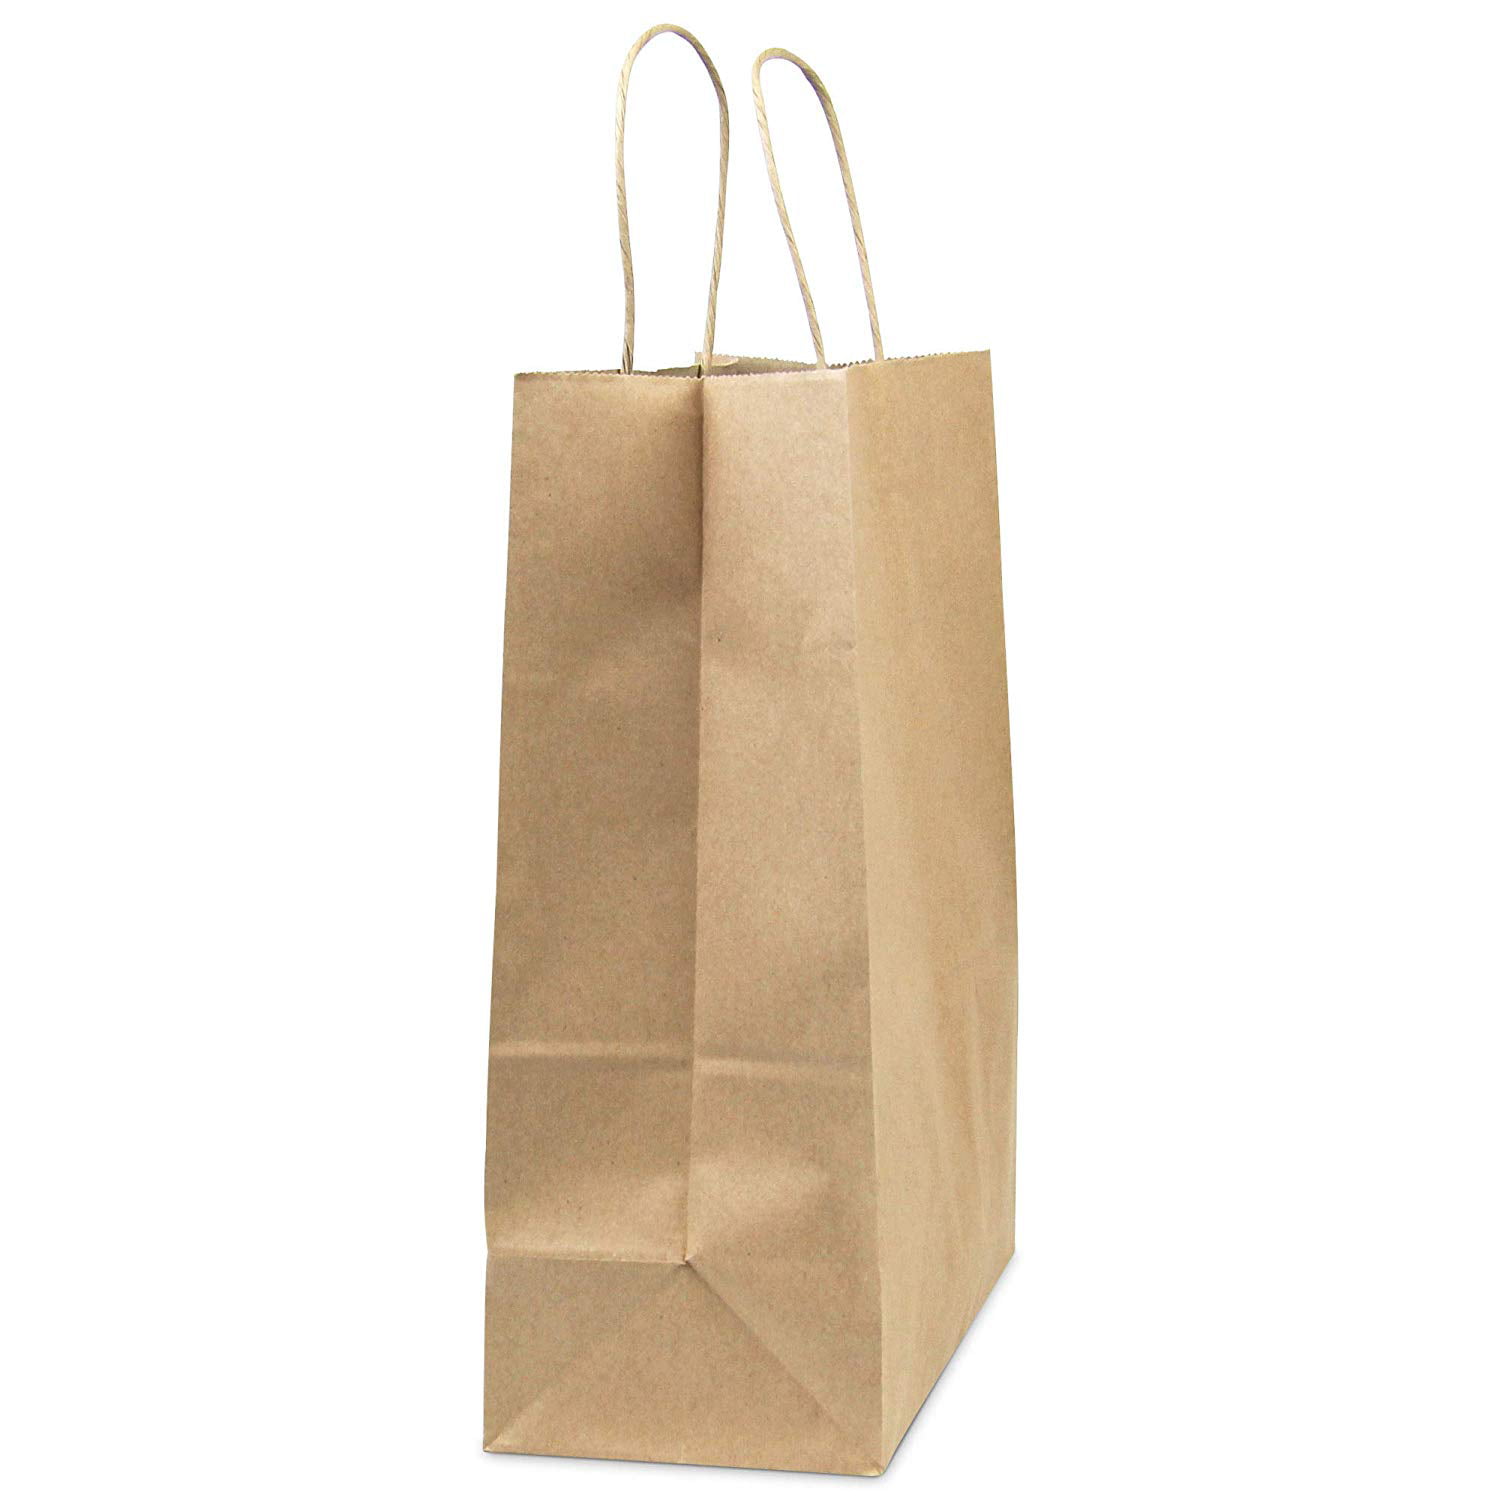 PACK 200 5" x 5" STRUNG WHITE PAPER BAG 